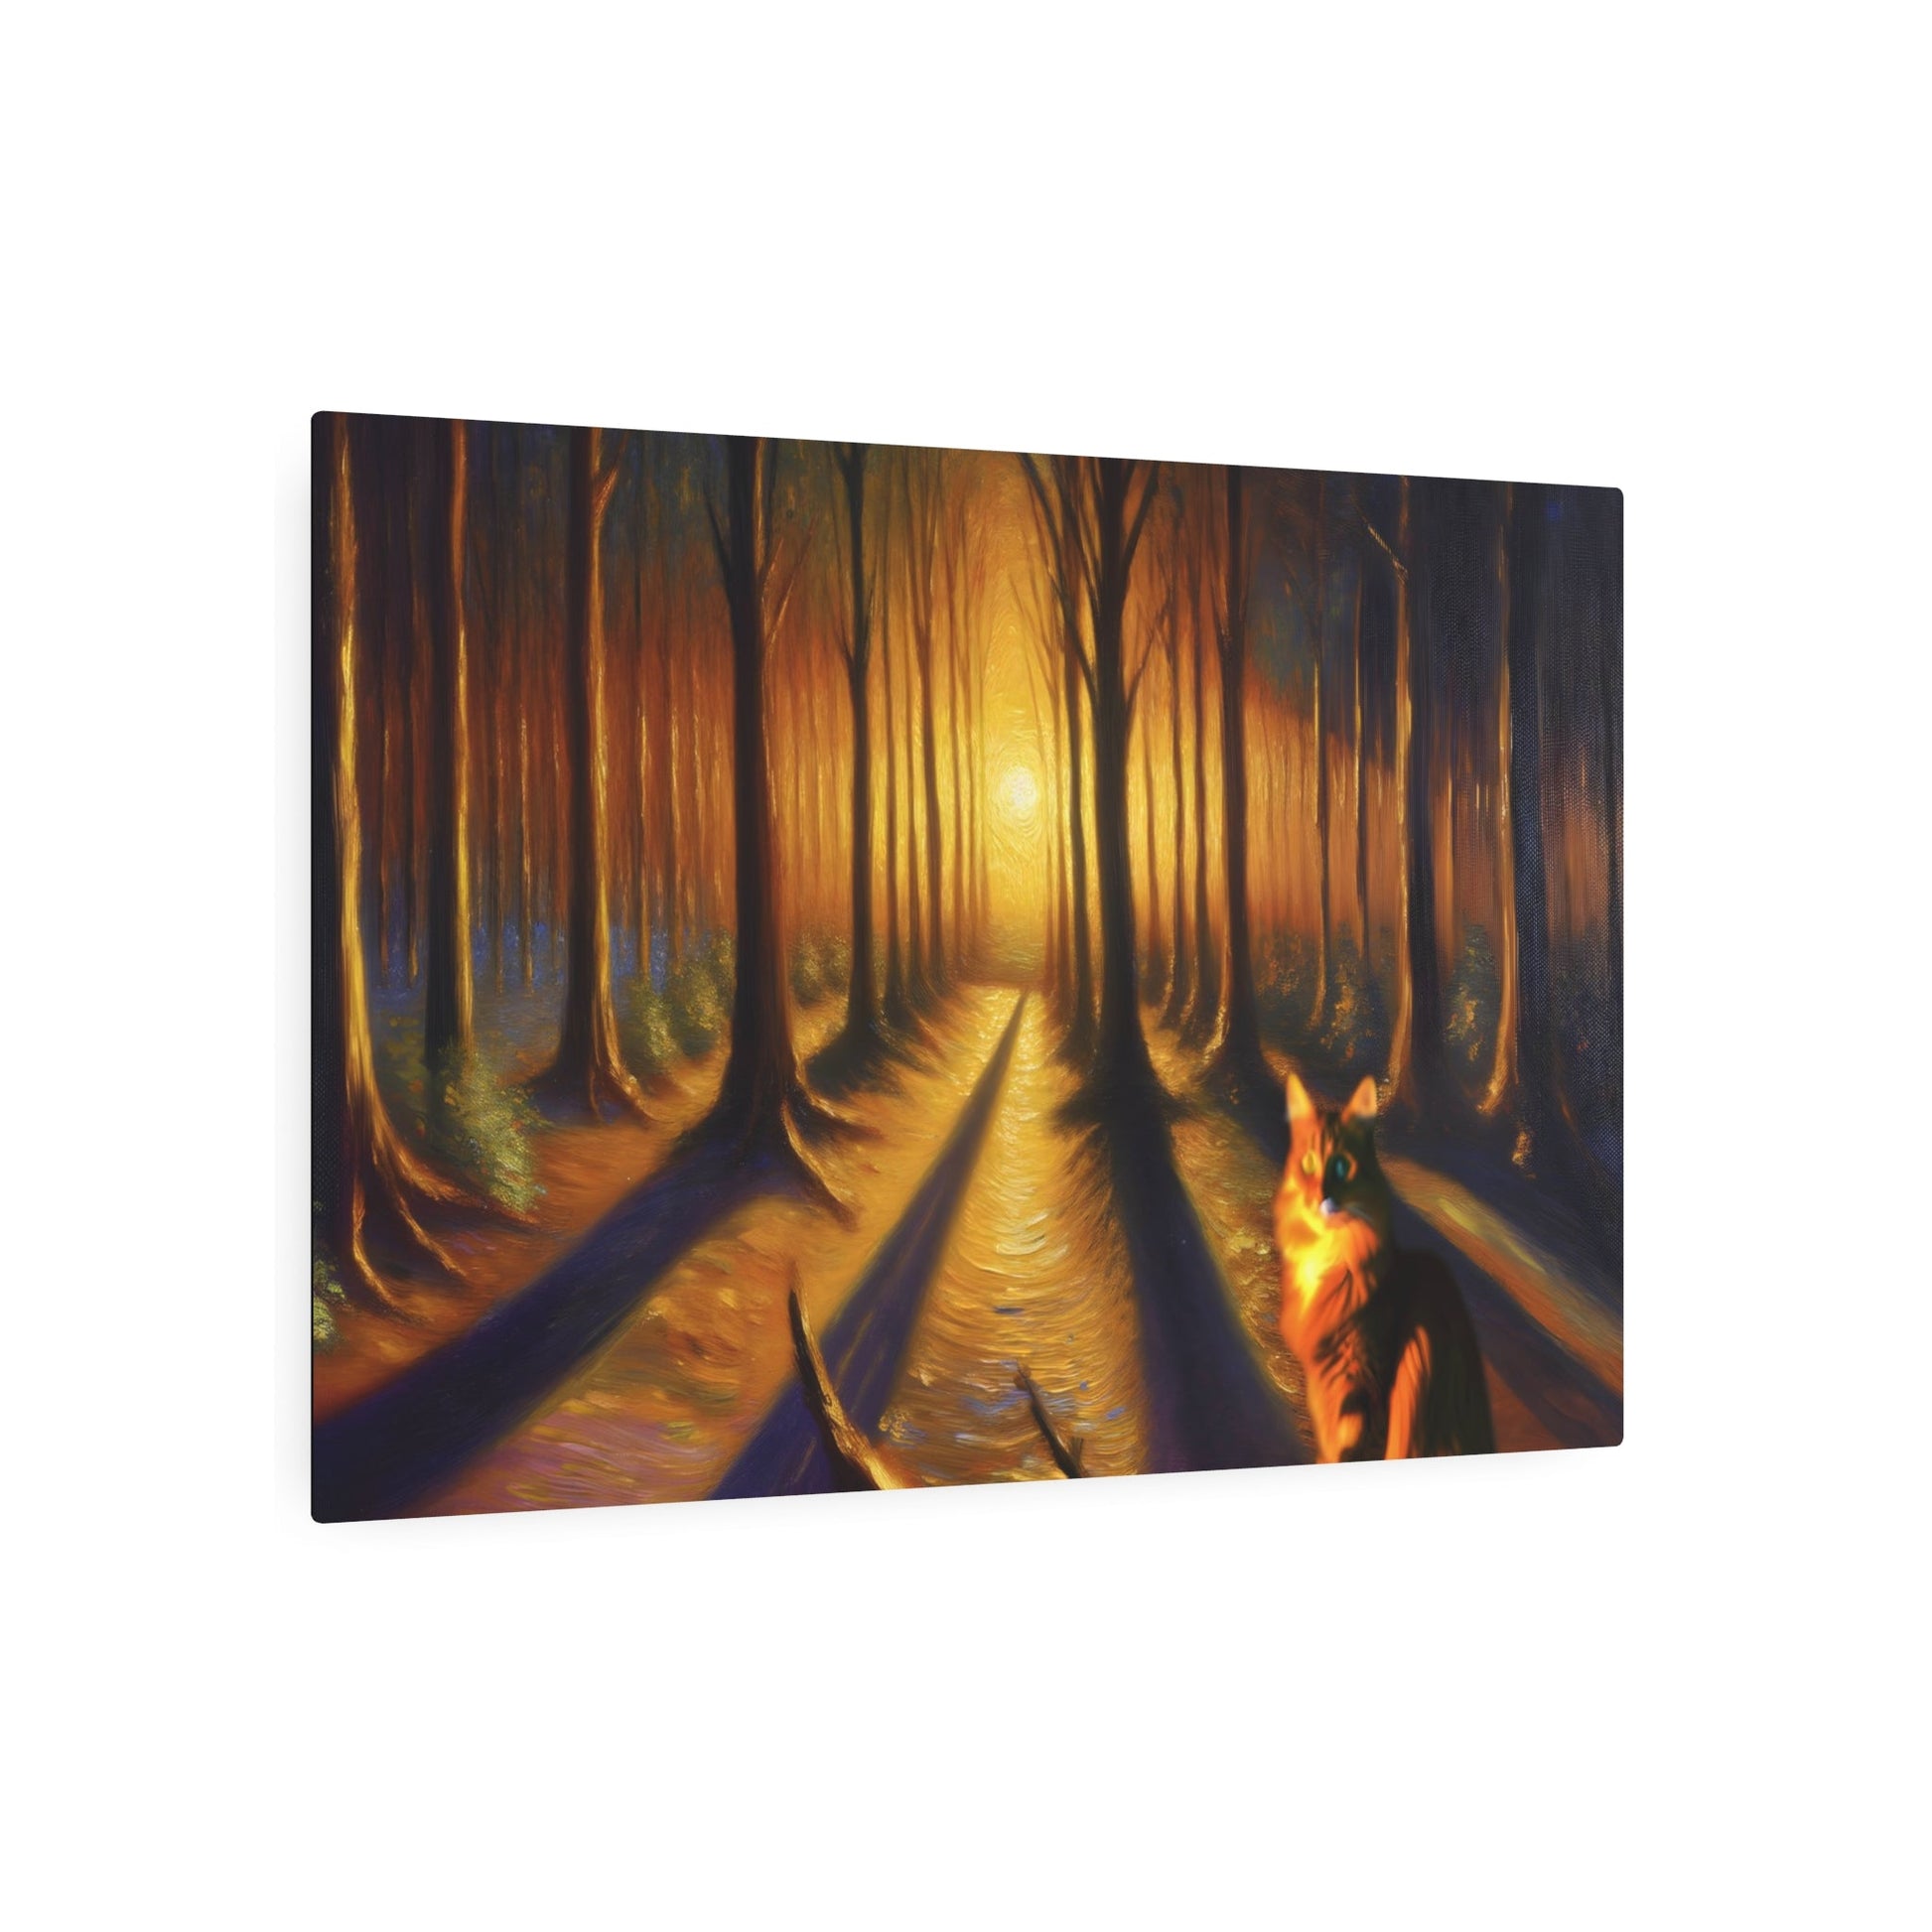 Metal Poster Art | "Majestic Dreamy Cat in Forest Sunset - Dramatic Romanticism Western Art Style Print" - Metal Poster Art 36″ x 24″ (Horizontal) 0.12''